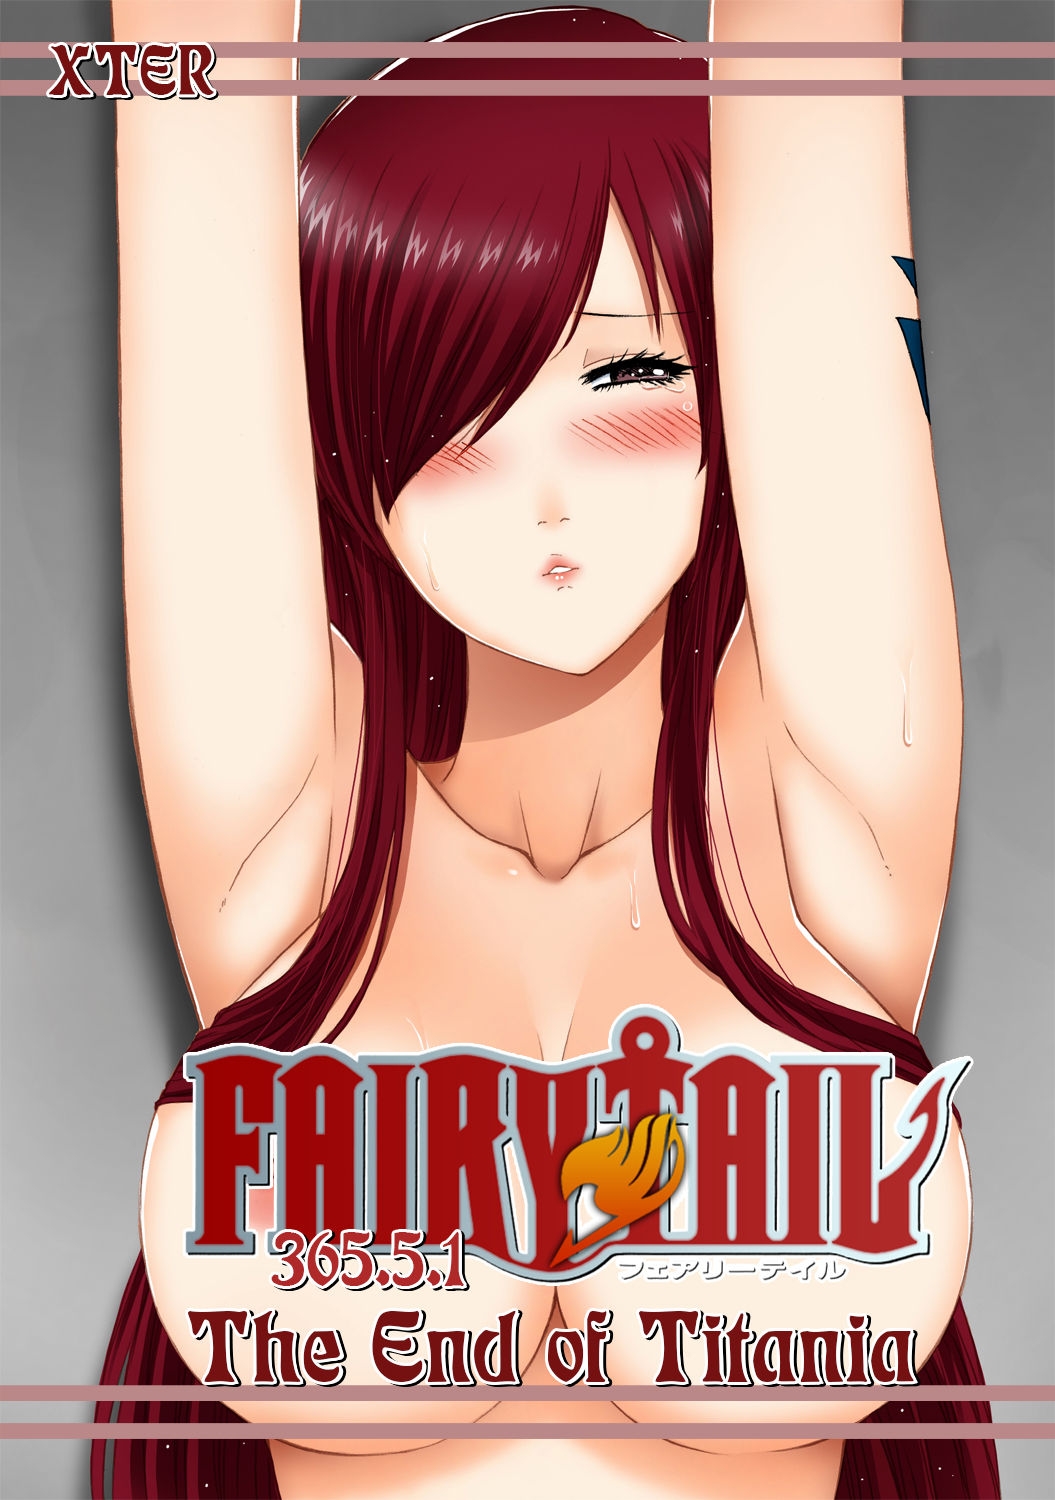 [Xter] Fairy Tail 365.5.1 The End of Titania (Fairy Tail) [Vietnamese Tiếng Việt] [❍长คʍเ.] 0